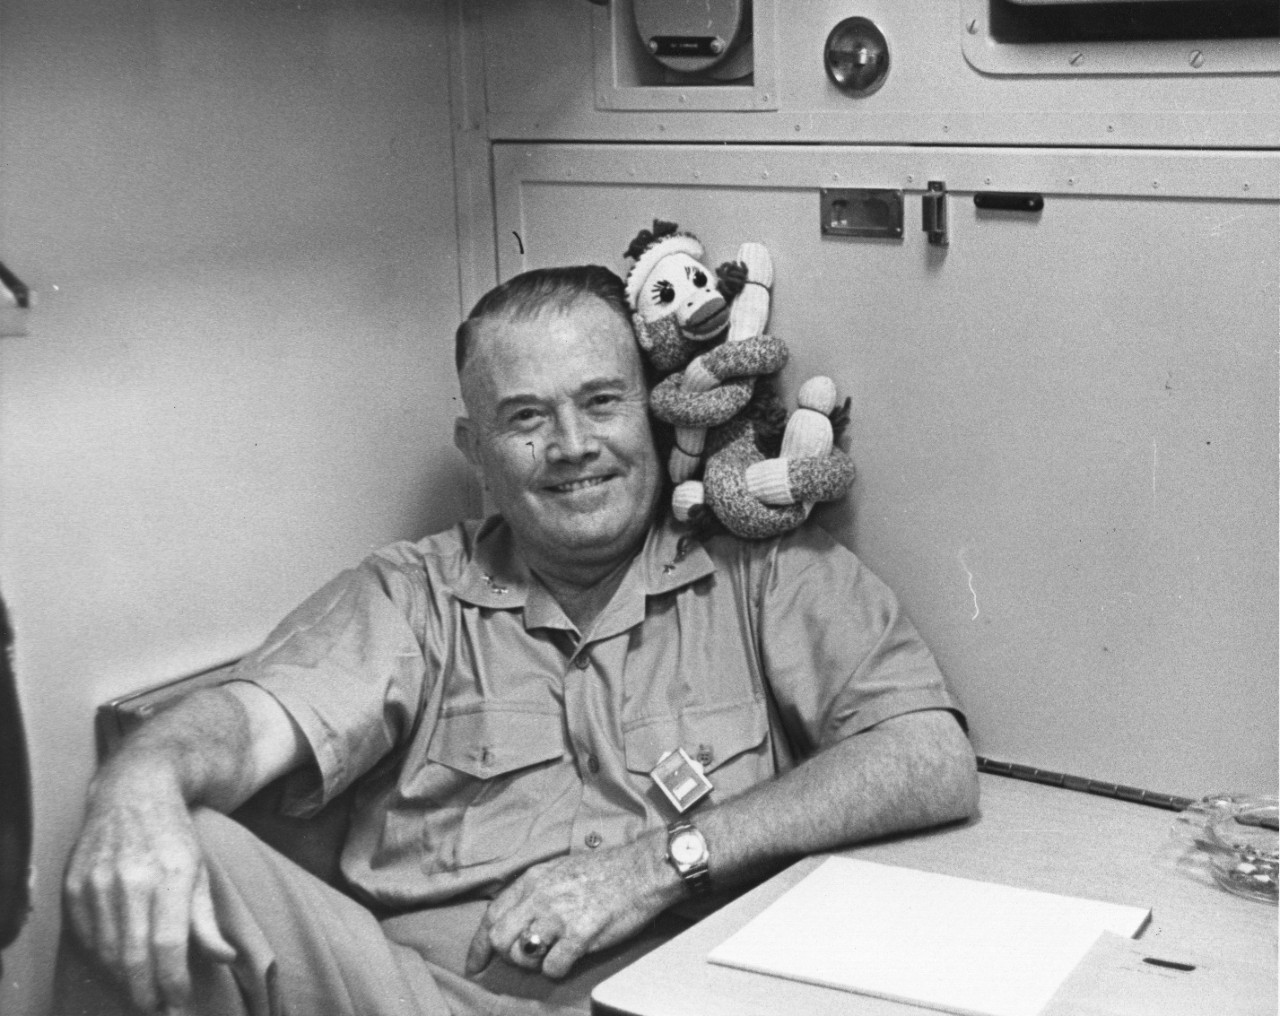 Rear Admiral William Raborn smiles with a sock monkey on his shoulder